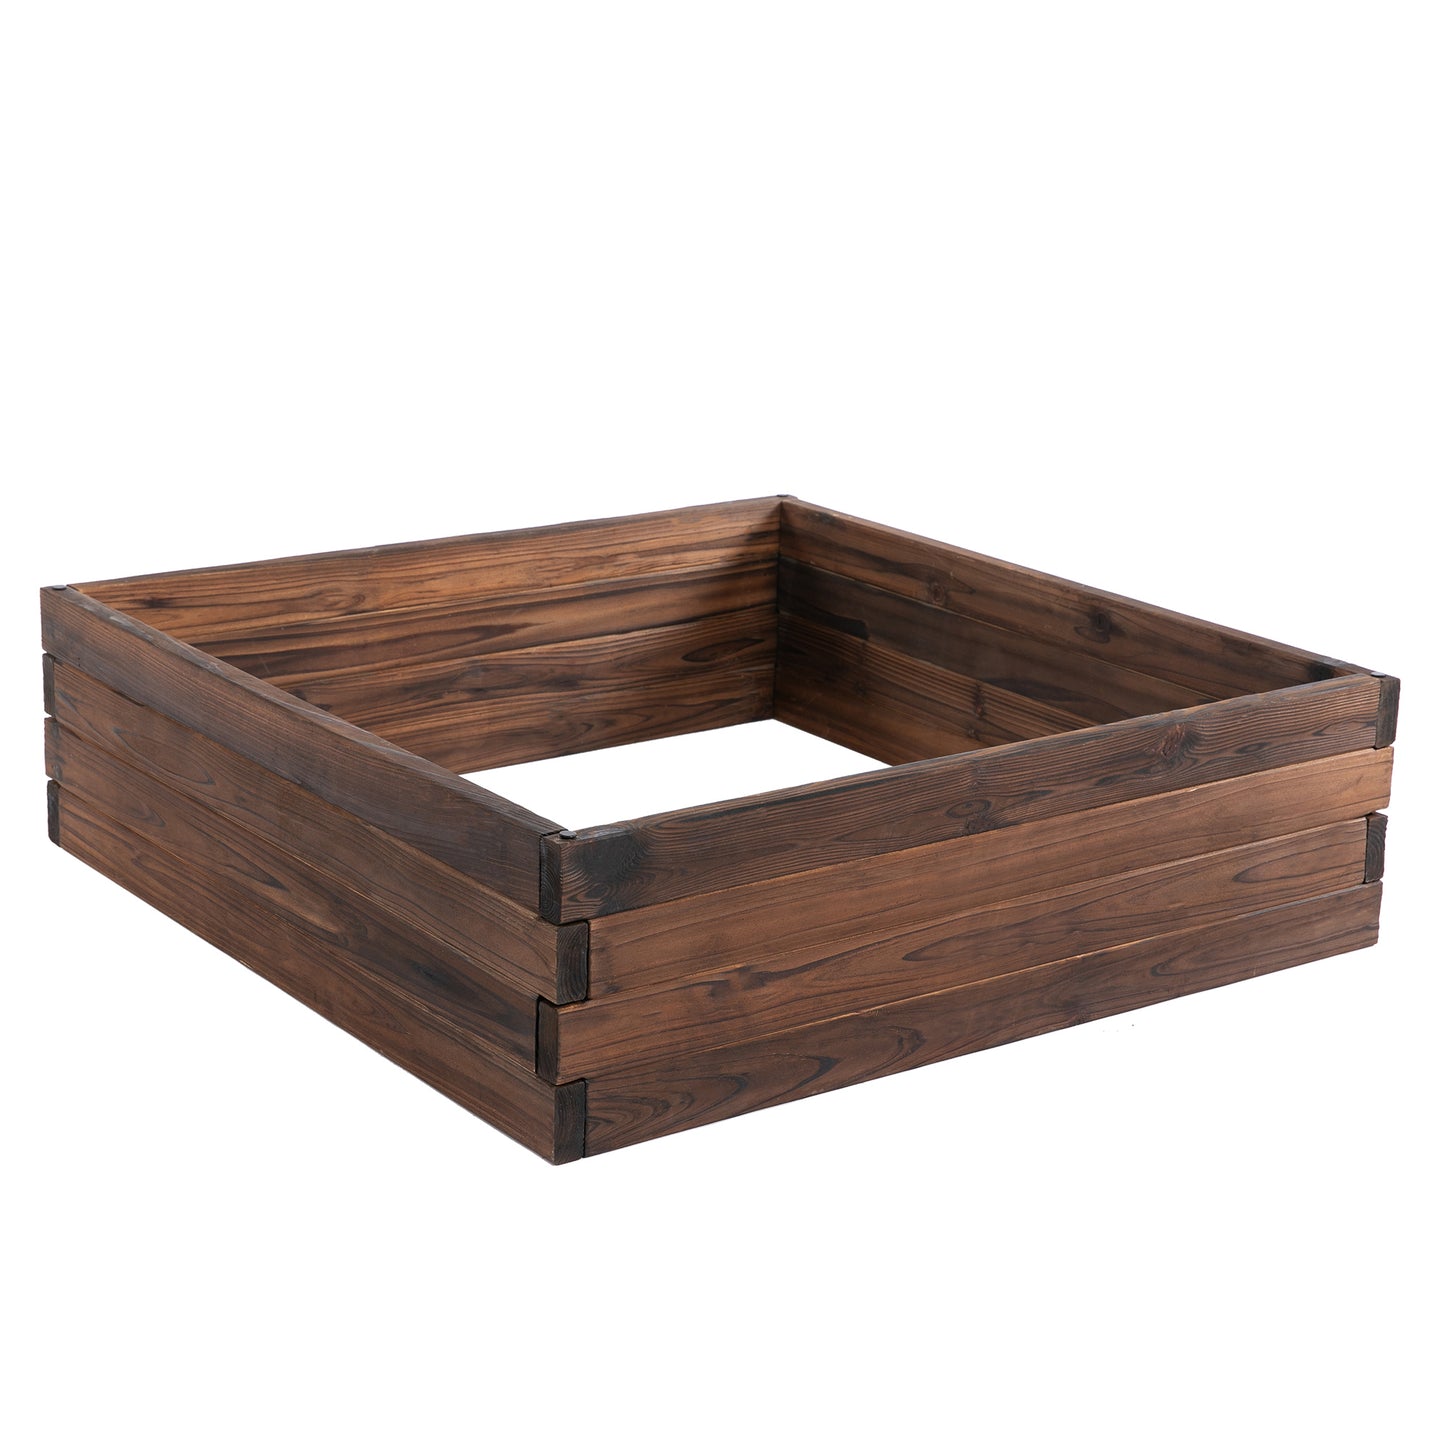 Outsunny Raised Garden Bed Planter Box: Wooden Outdoor Patio Planter for Plant, Flower & Vegetable Growing, 80L x 80W x 22.5H cm